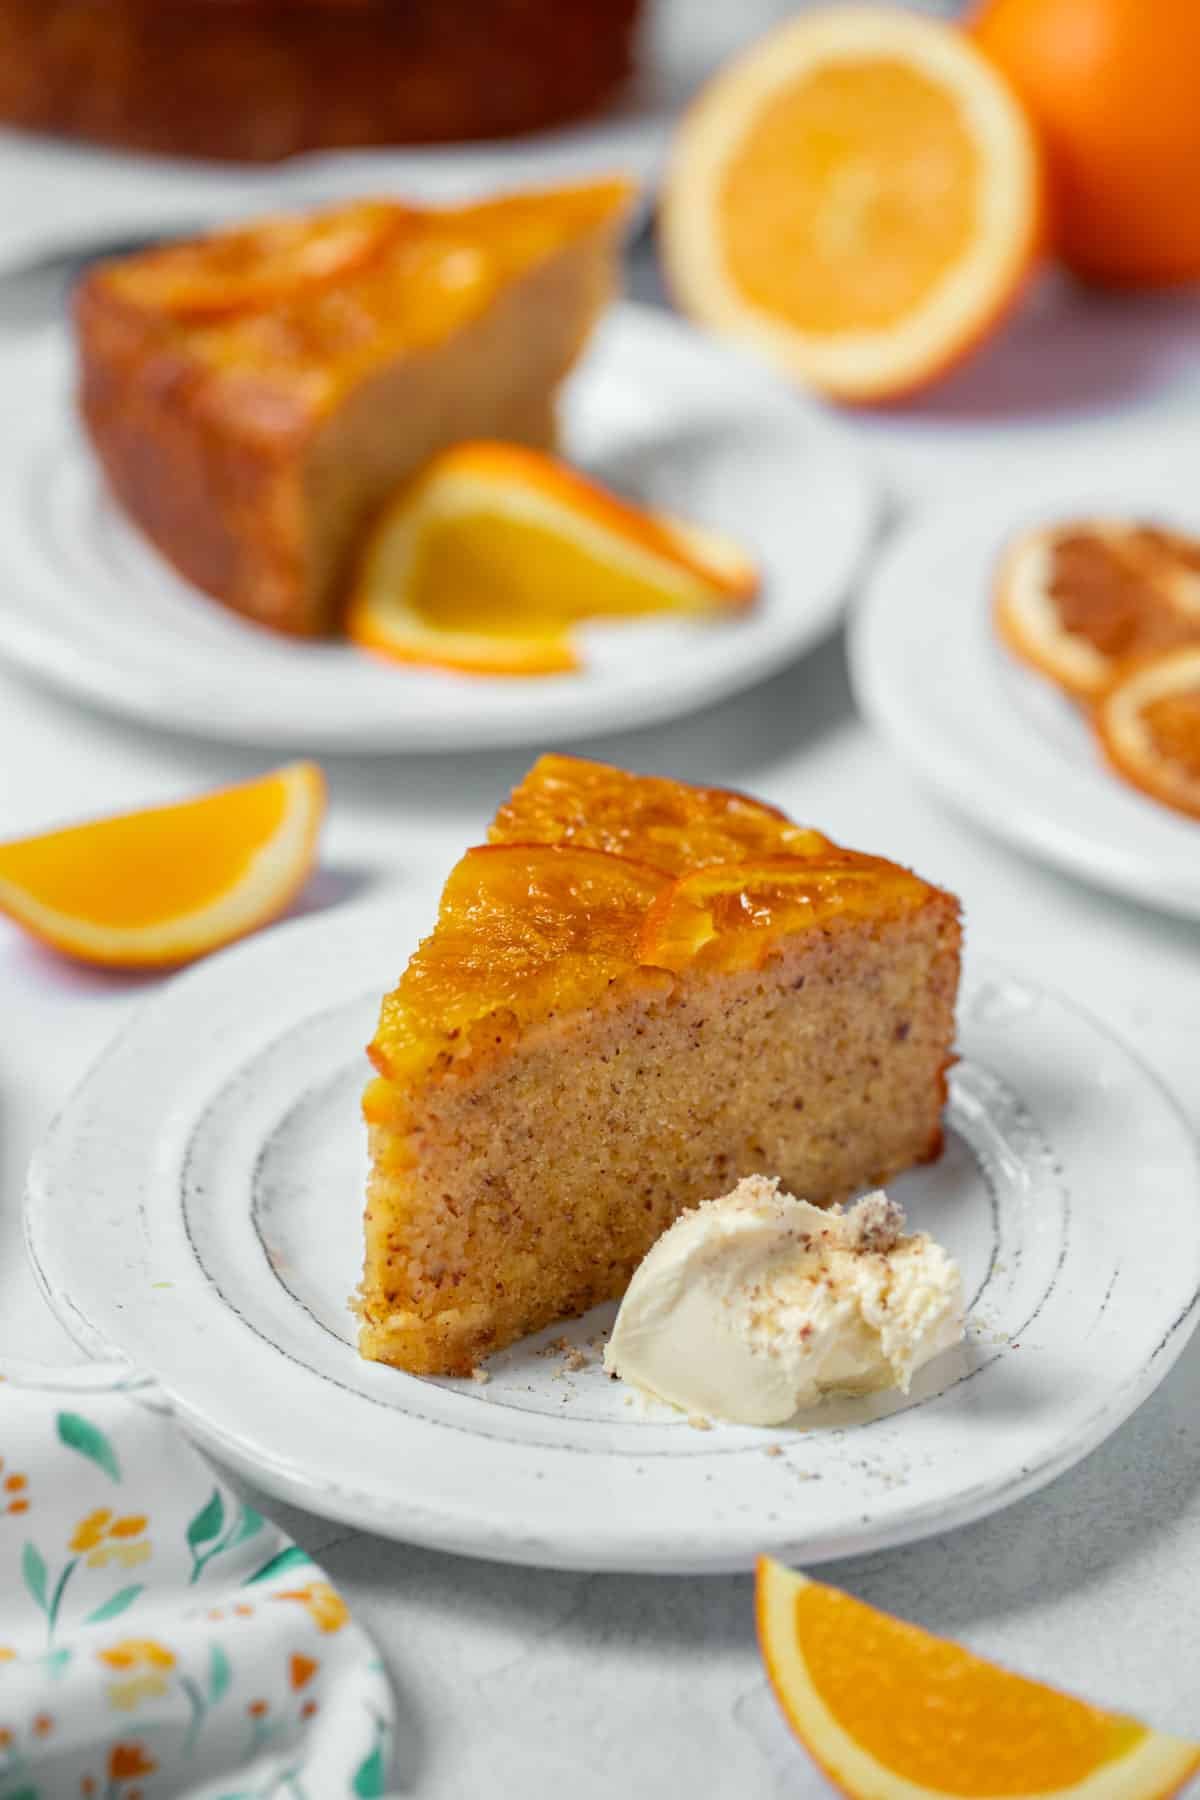 a piece of orange cake on a plate with cream and orange slices.